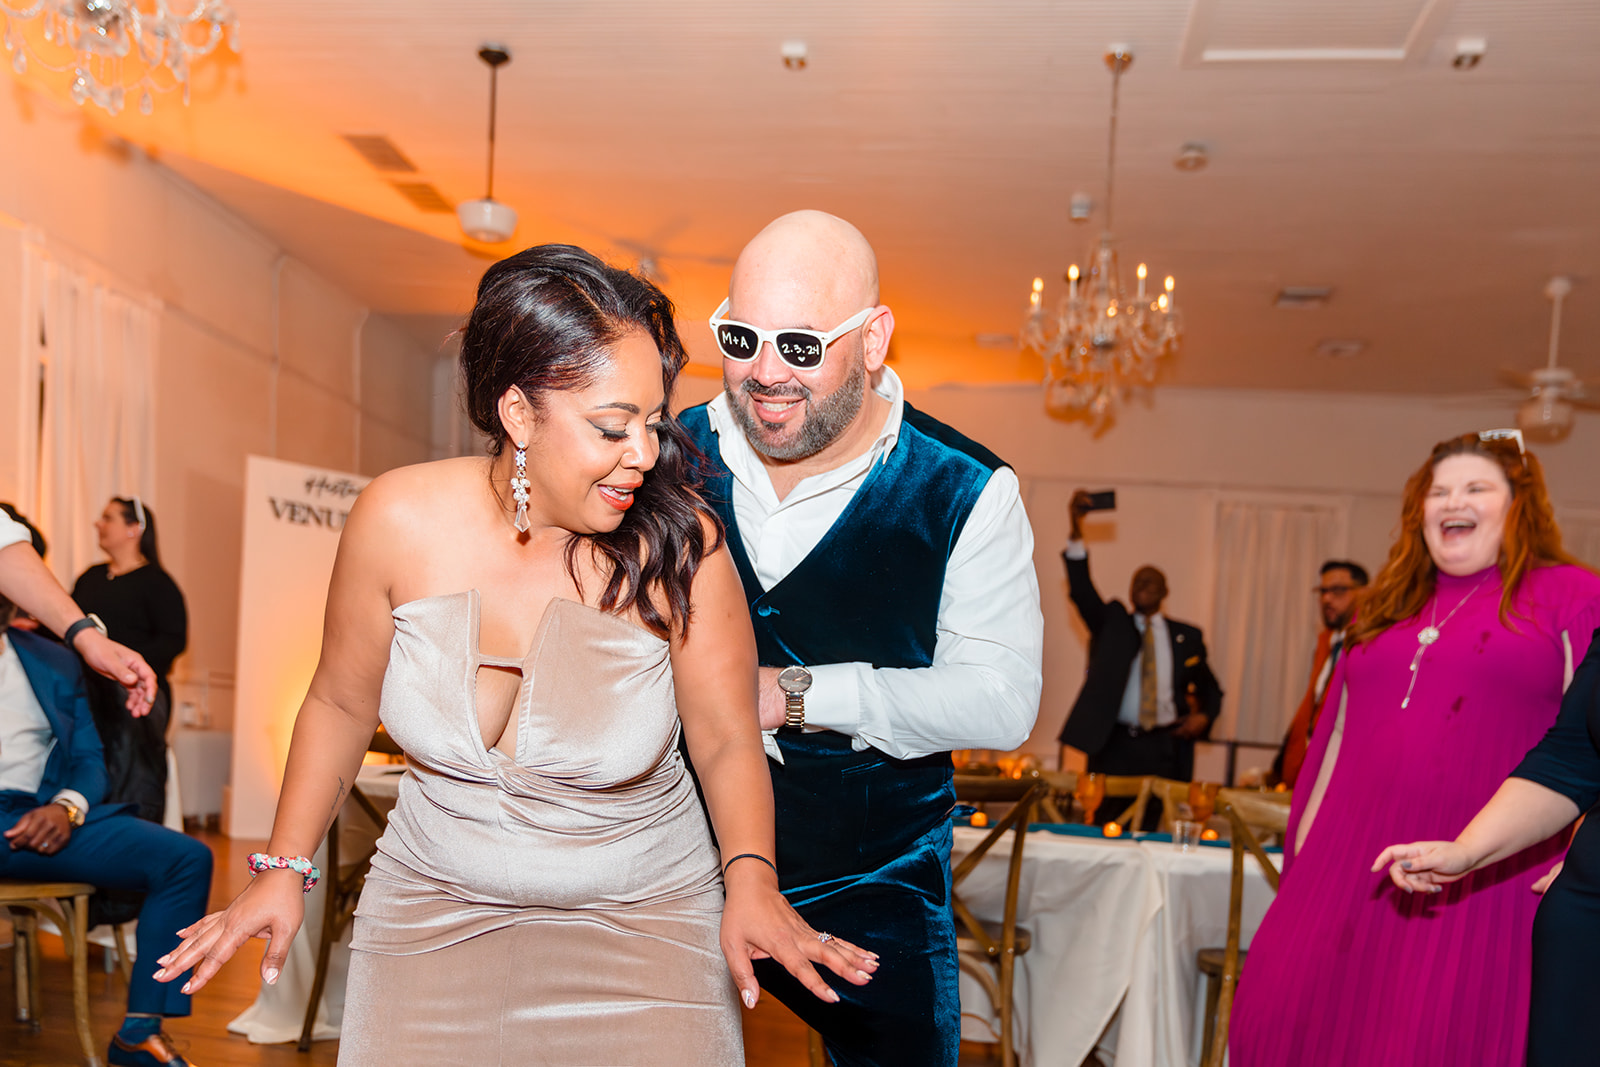 Fun moment of the couple dancing at Venue 1902, with the wife dancing on her husband wearing sunglasses, showcasing their unique personality.